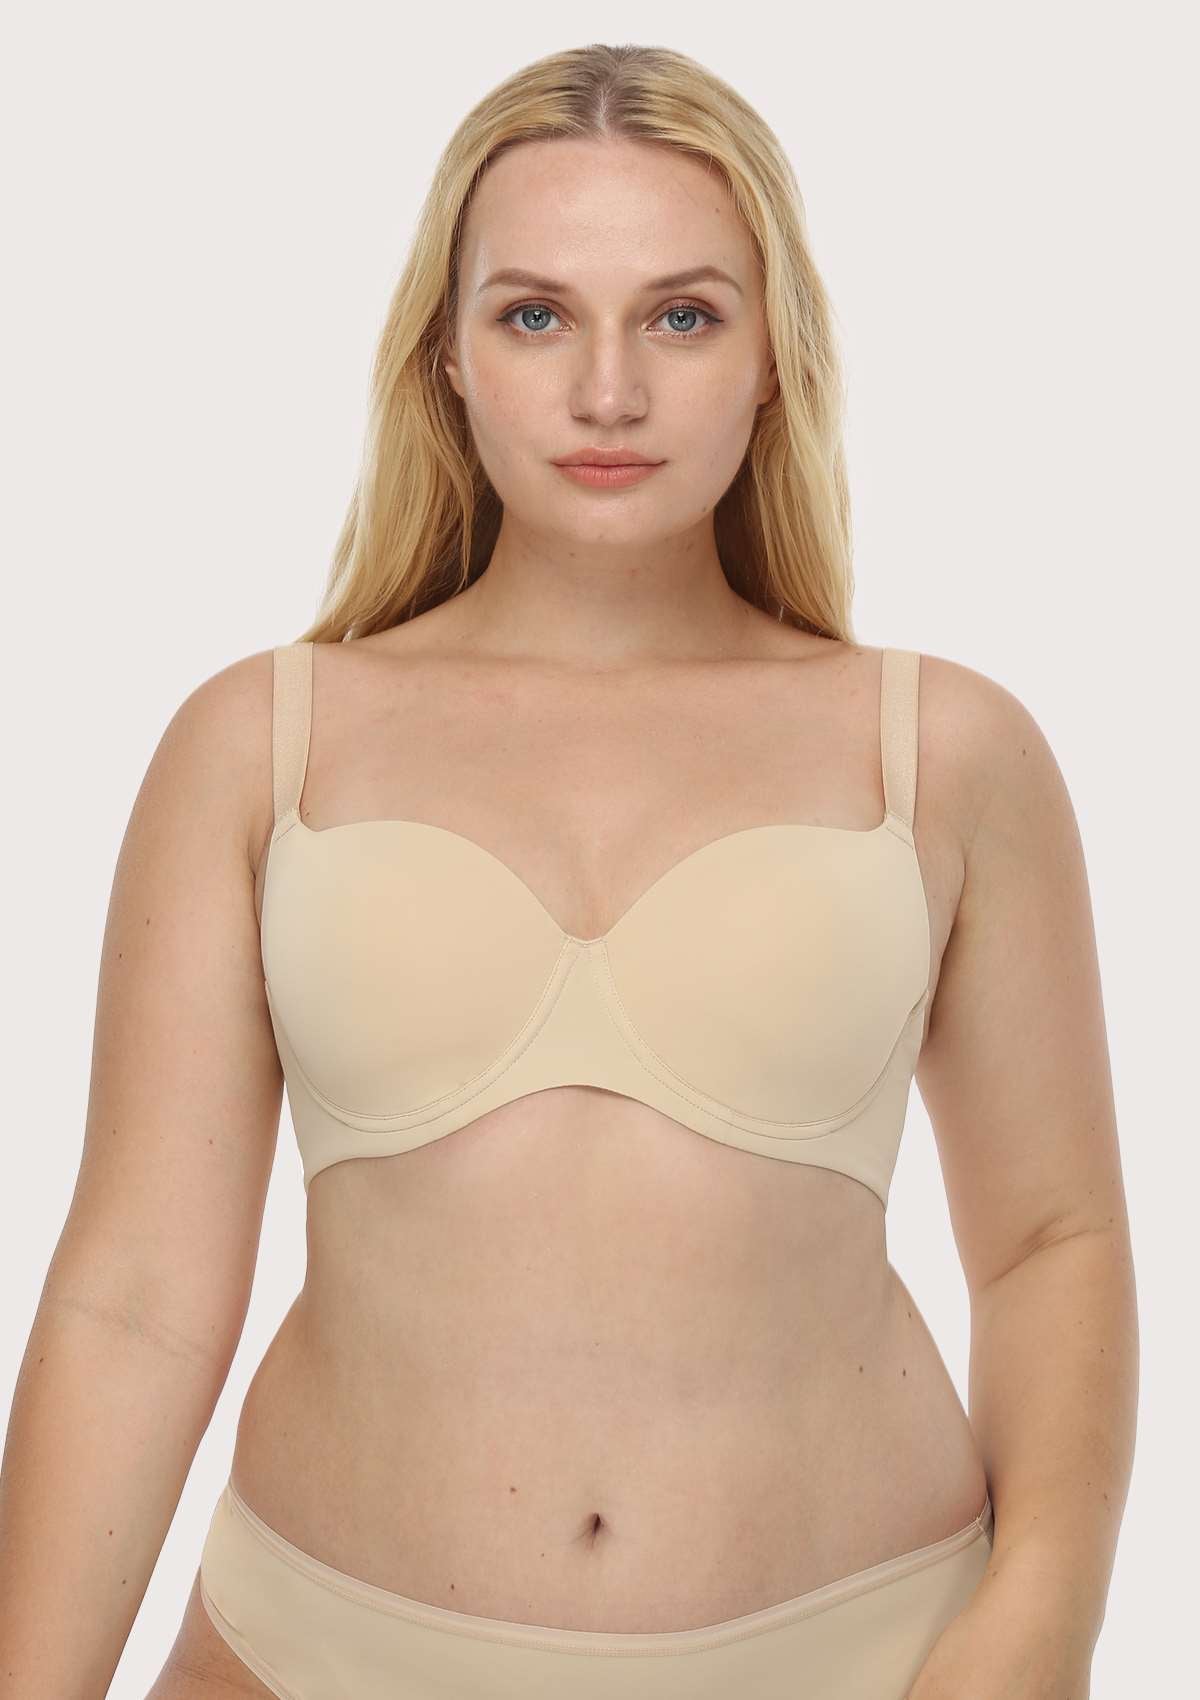 HSIA Gemma Smooth Padded T-shirt Everyday Bras - For Lift And Comfort - Beige / 44 / G